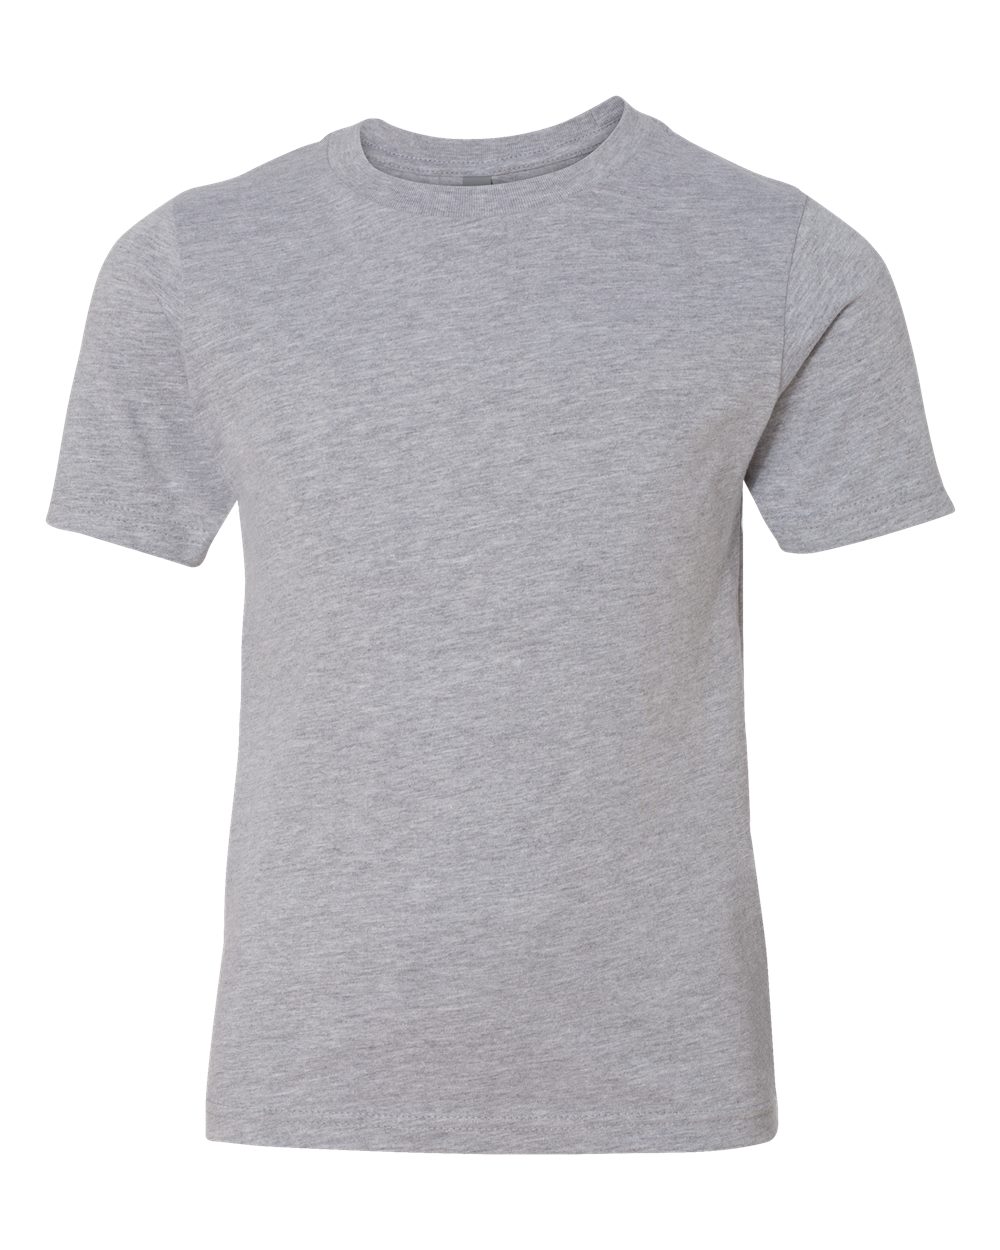 click to view Heather Grey(90/10)